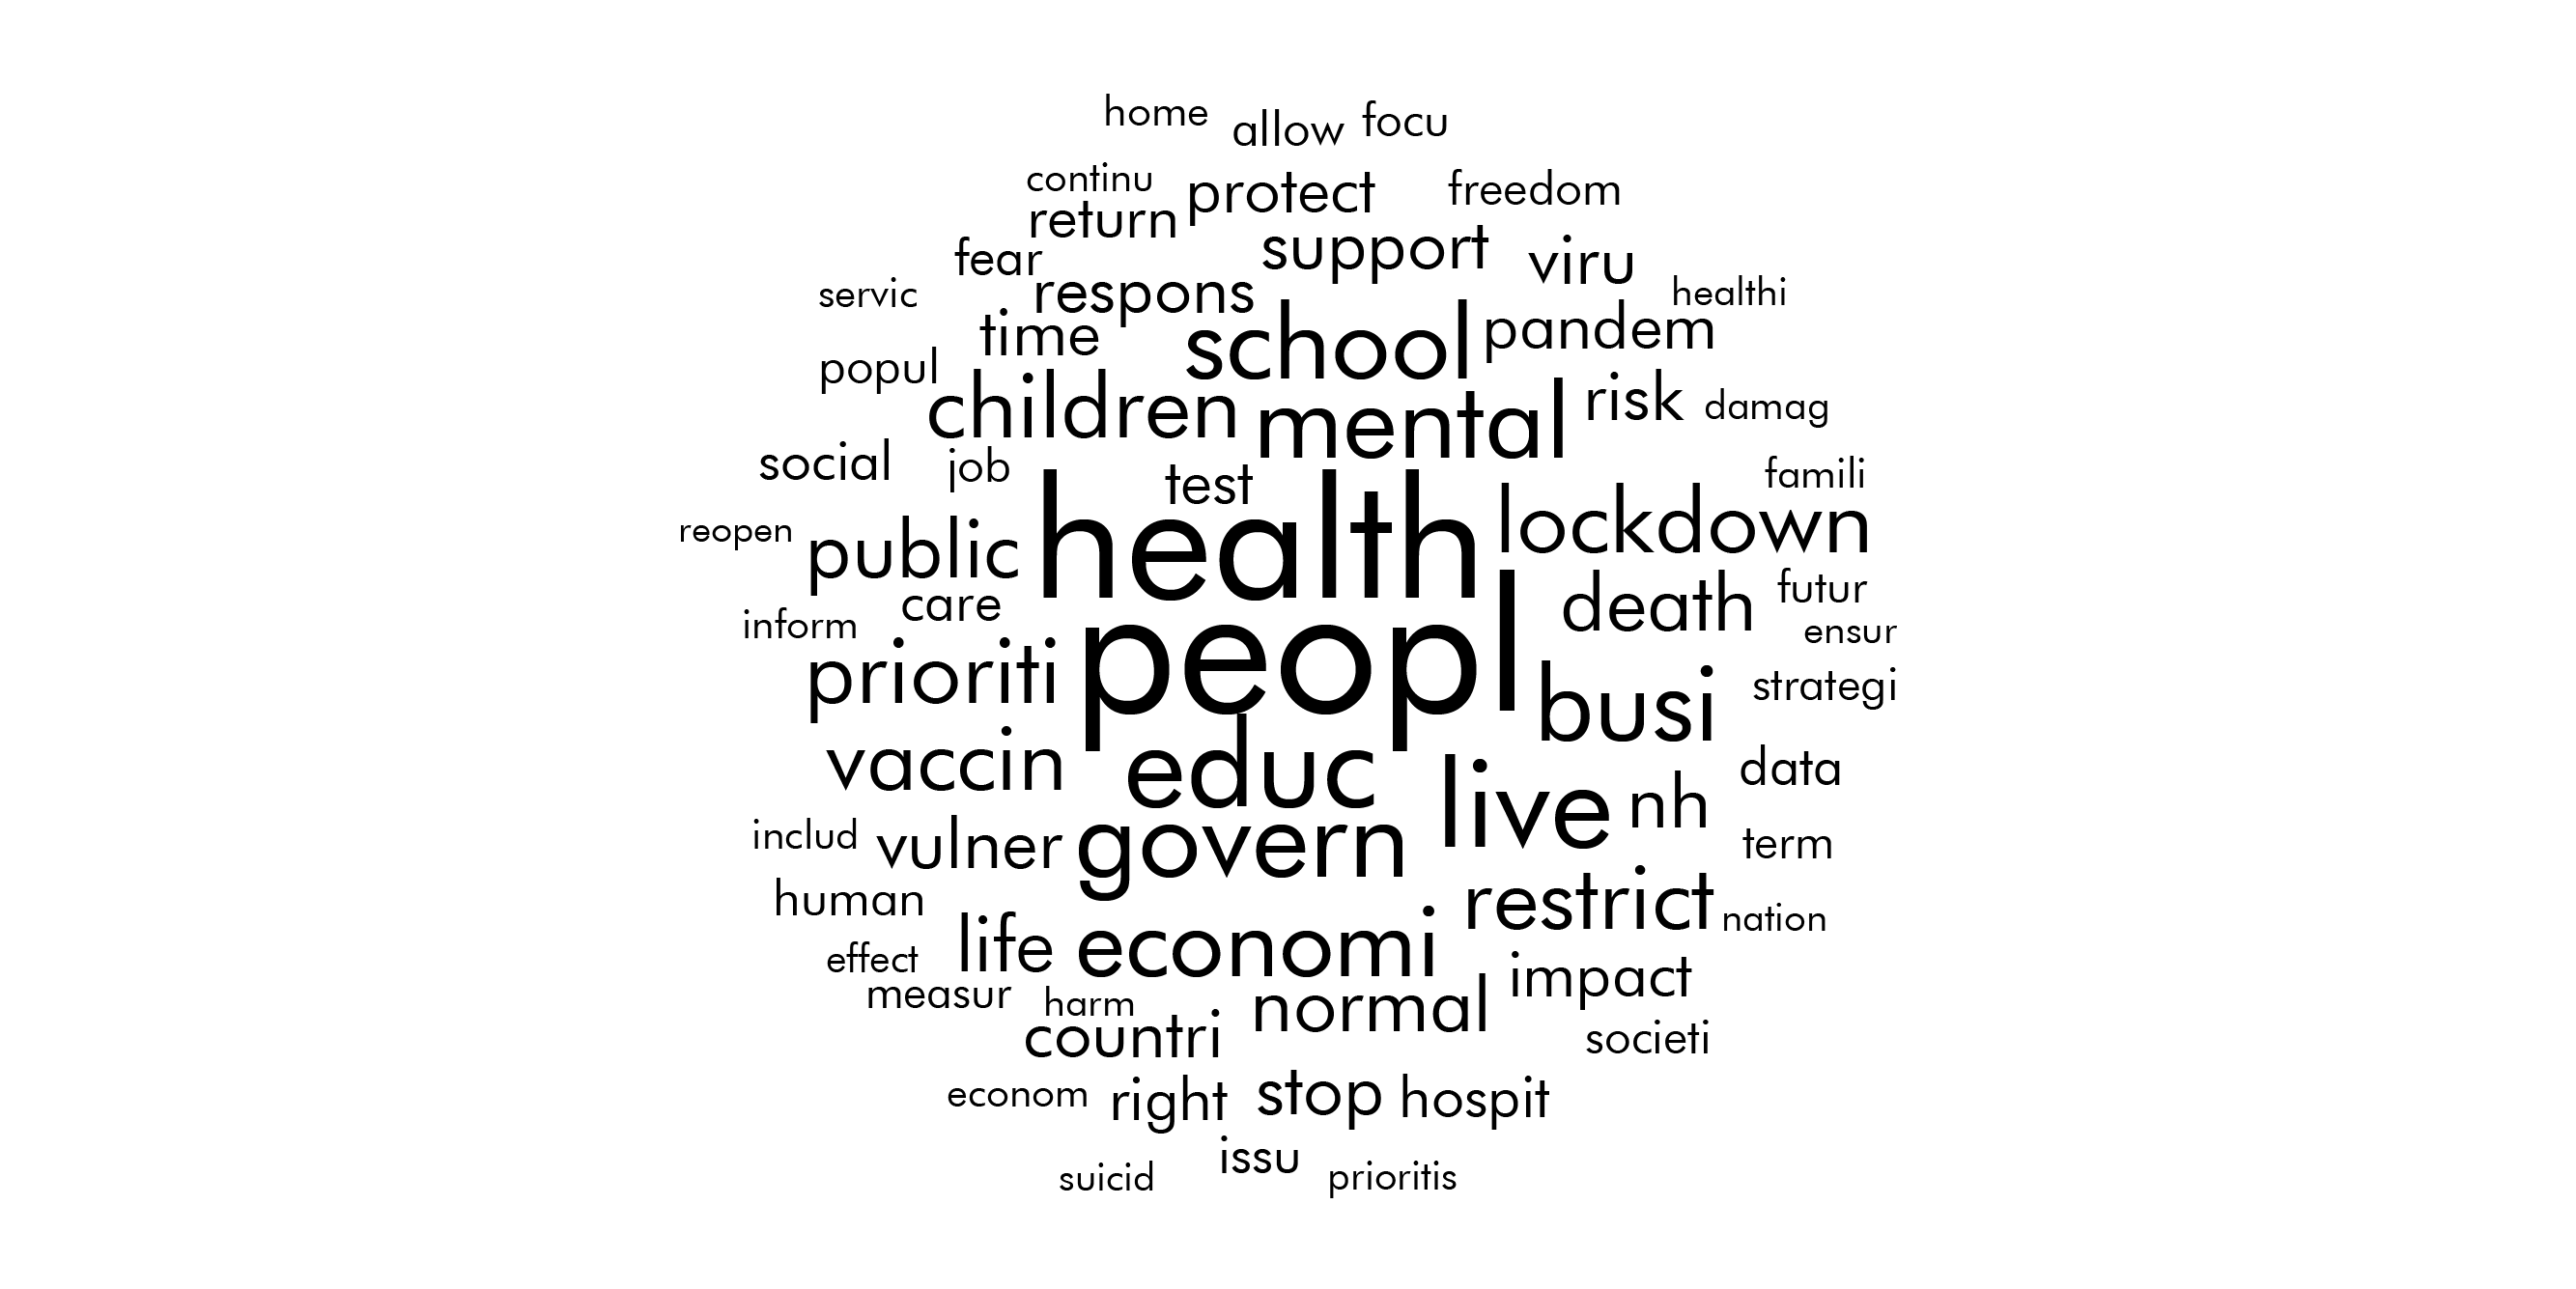 Word cloud highlighting issues raised in the written responses.